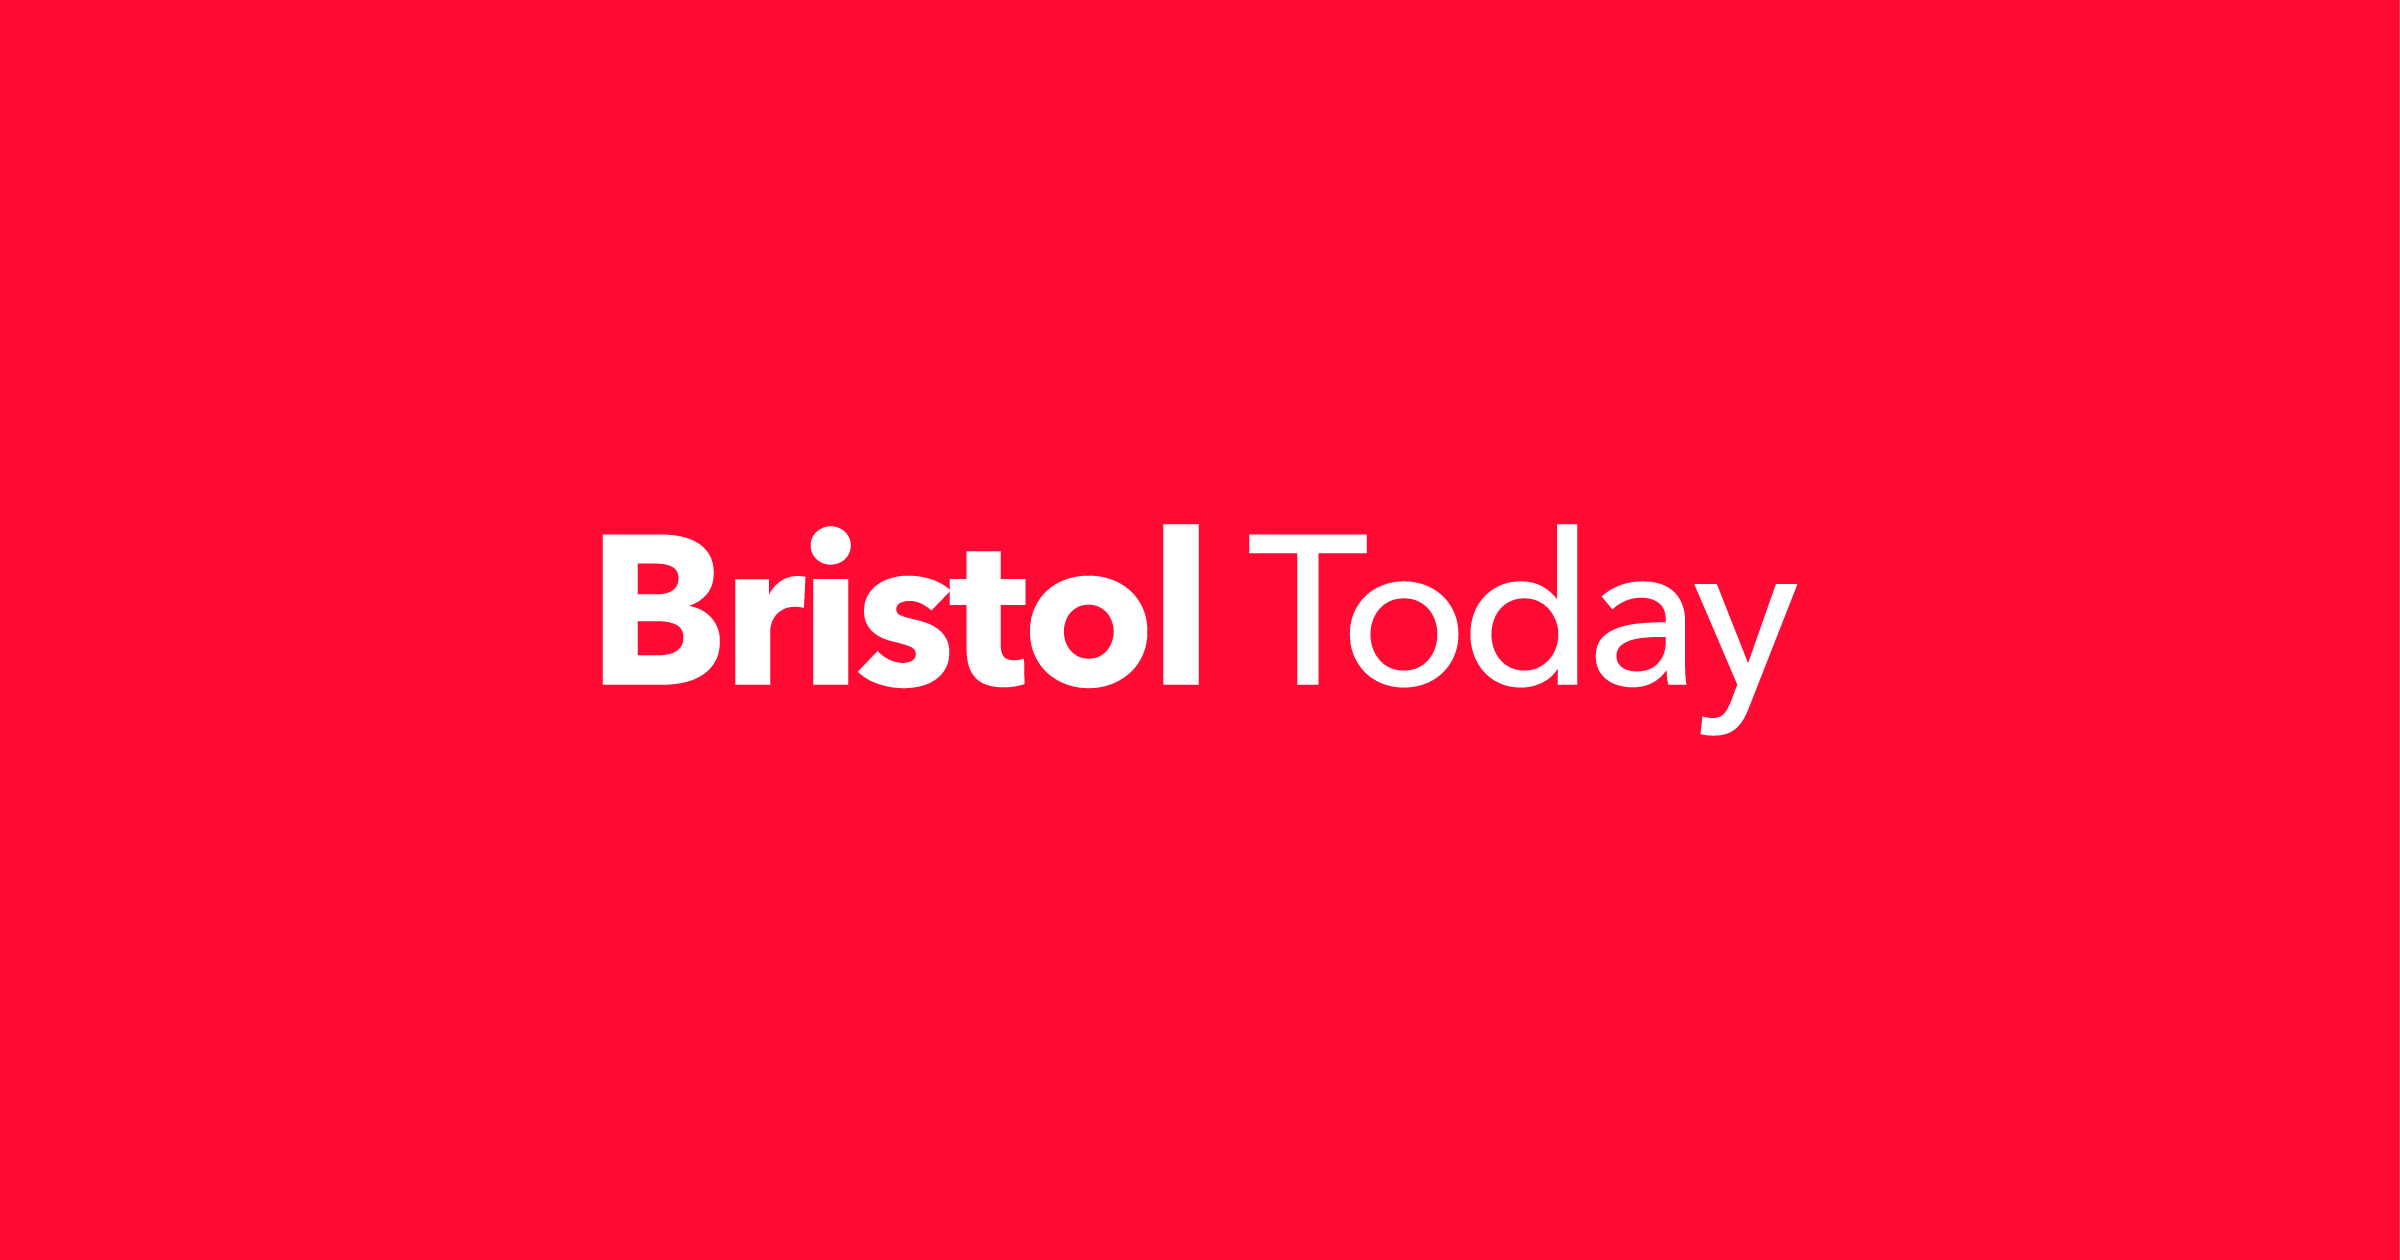 Bristol Today: what's happening in Bristol?